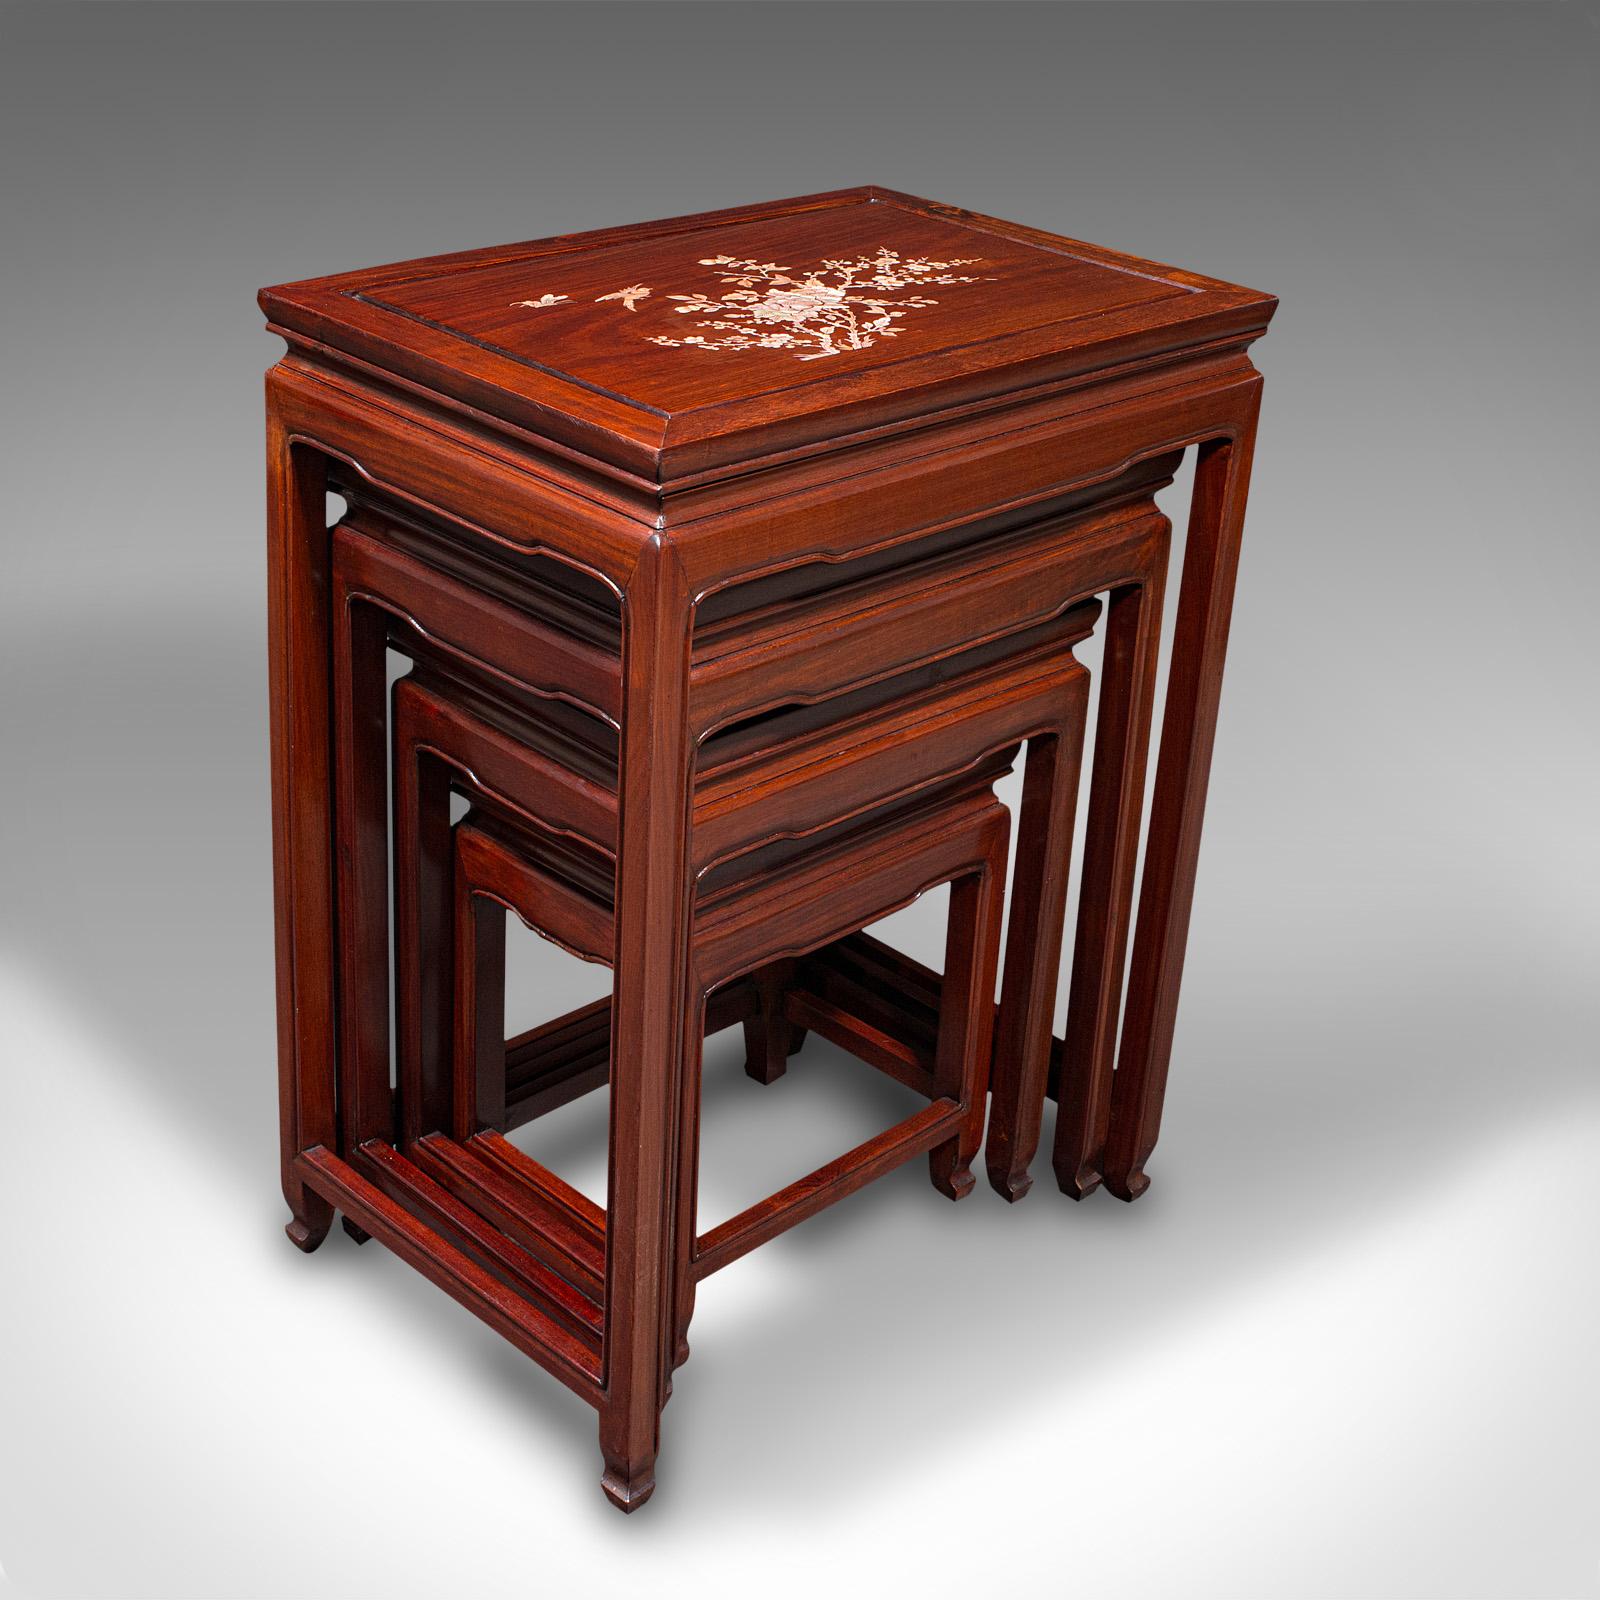 This is a vintage quartetto of nest tables. A Chinese, rosewood graduated occasional table with Mother of Pearl inlay, dating to the mid 20th century, circa 1950.

Delightfully presented nesting tables, with great colour and finish
Displaying a